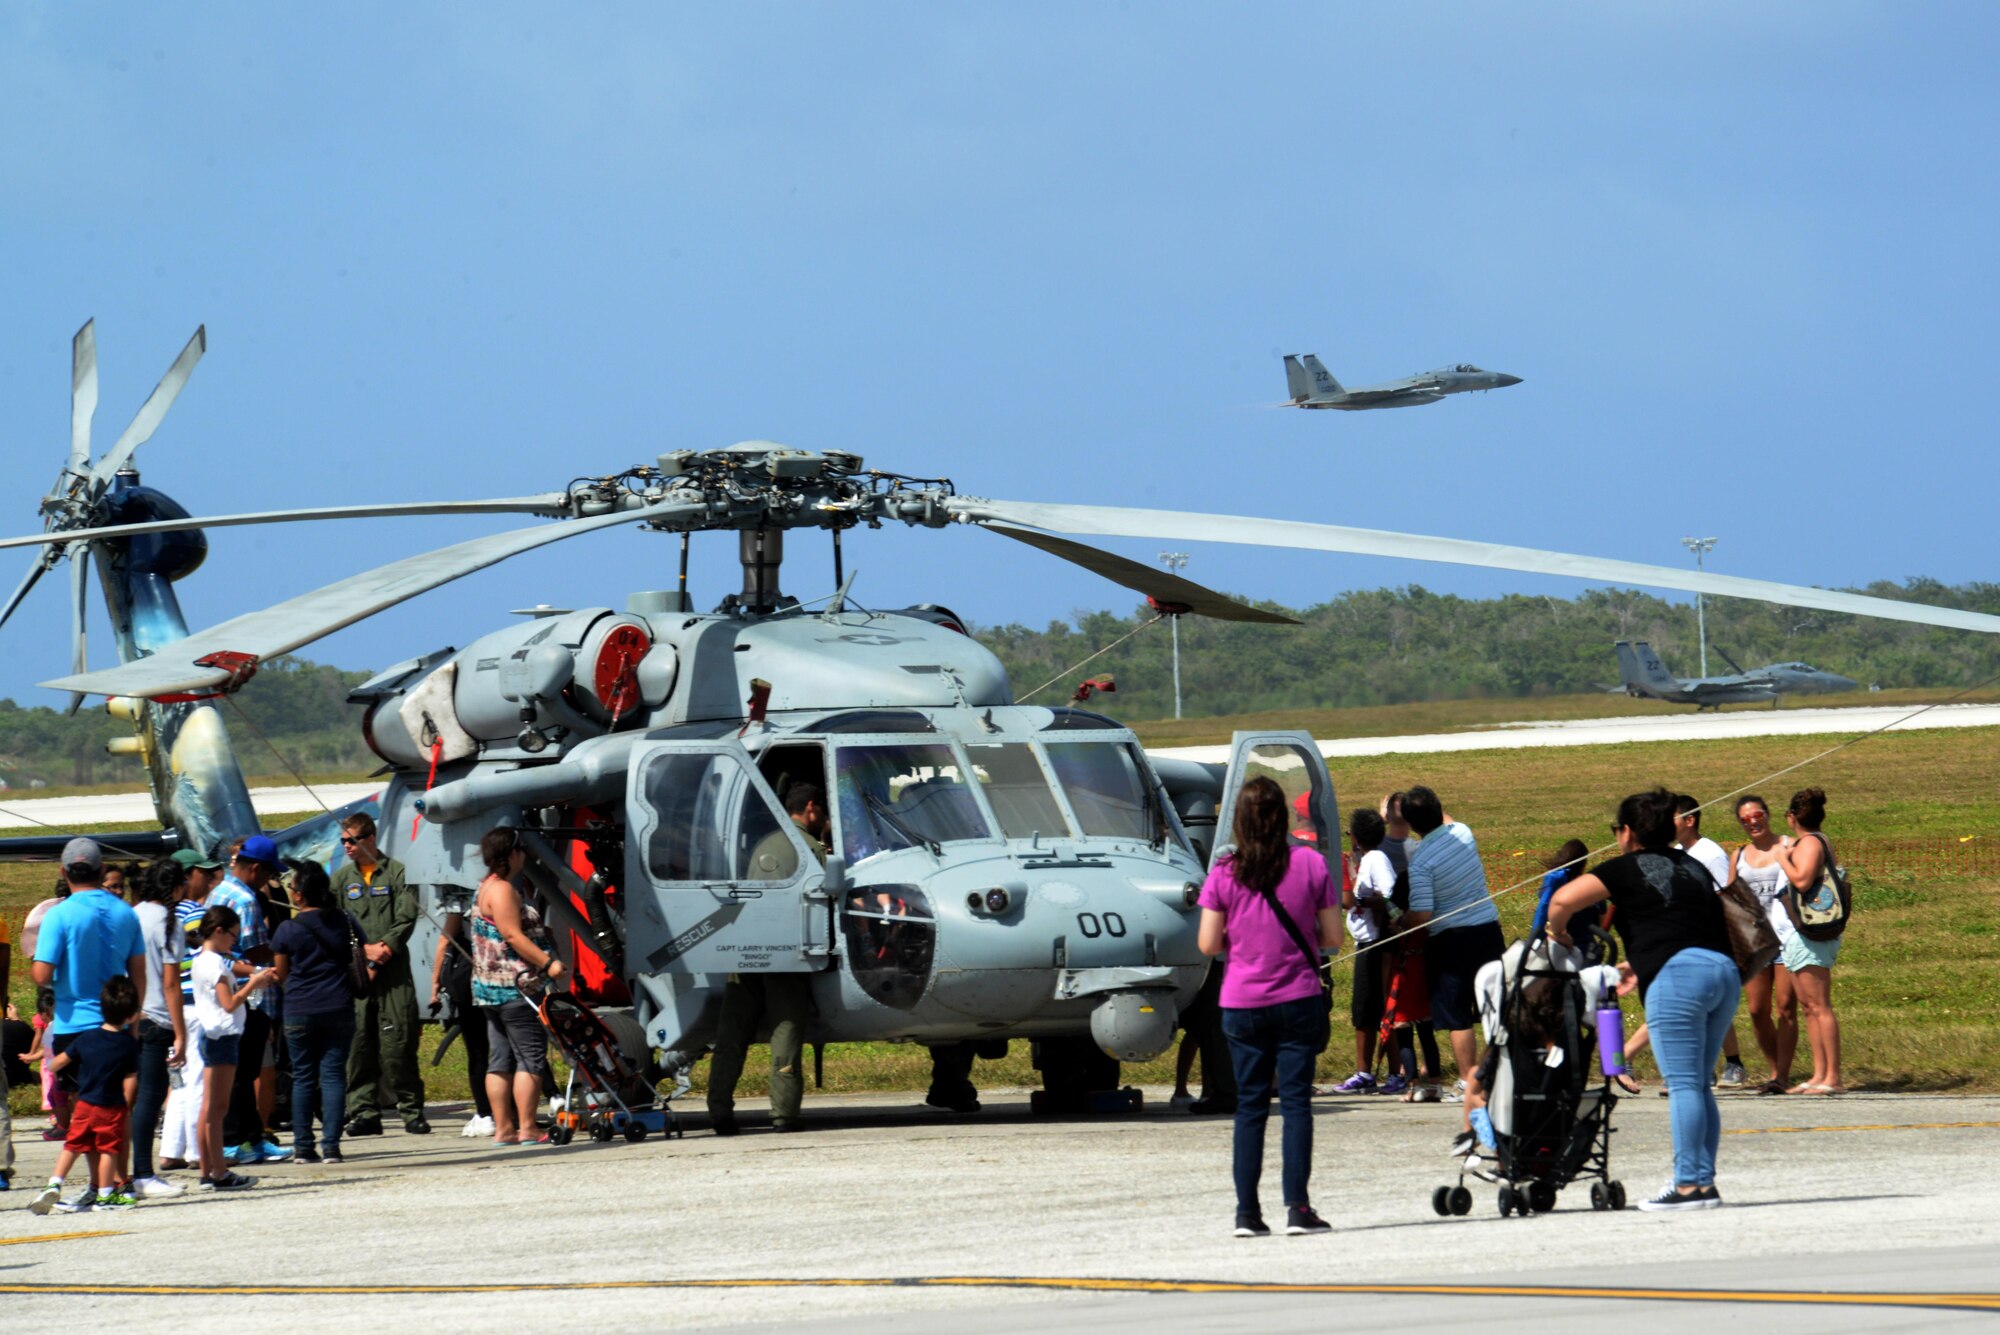 A F-15 Eagle soars past a crowd of people admiring a Helo Feb. 20 during the 2016 Pacific Air Partners Open House at Andersen Air Force Base, Guam. The open house aims to enhance public awareness of the military's mission, equipment, facilities and personnel and to promote positive community relations.
(U.S. Air Force Photo/Airman 1st Class Alexa Ann Henderson)
